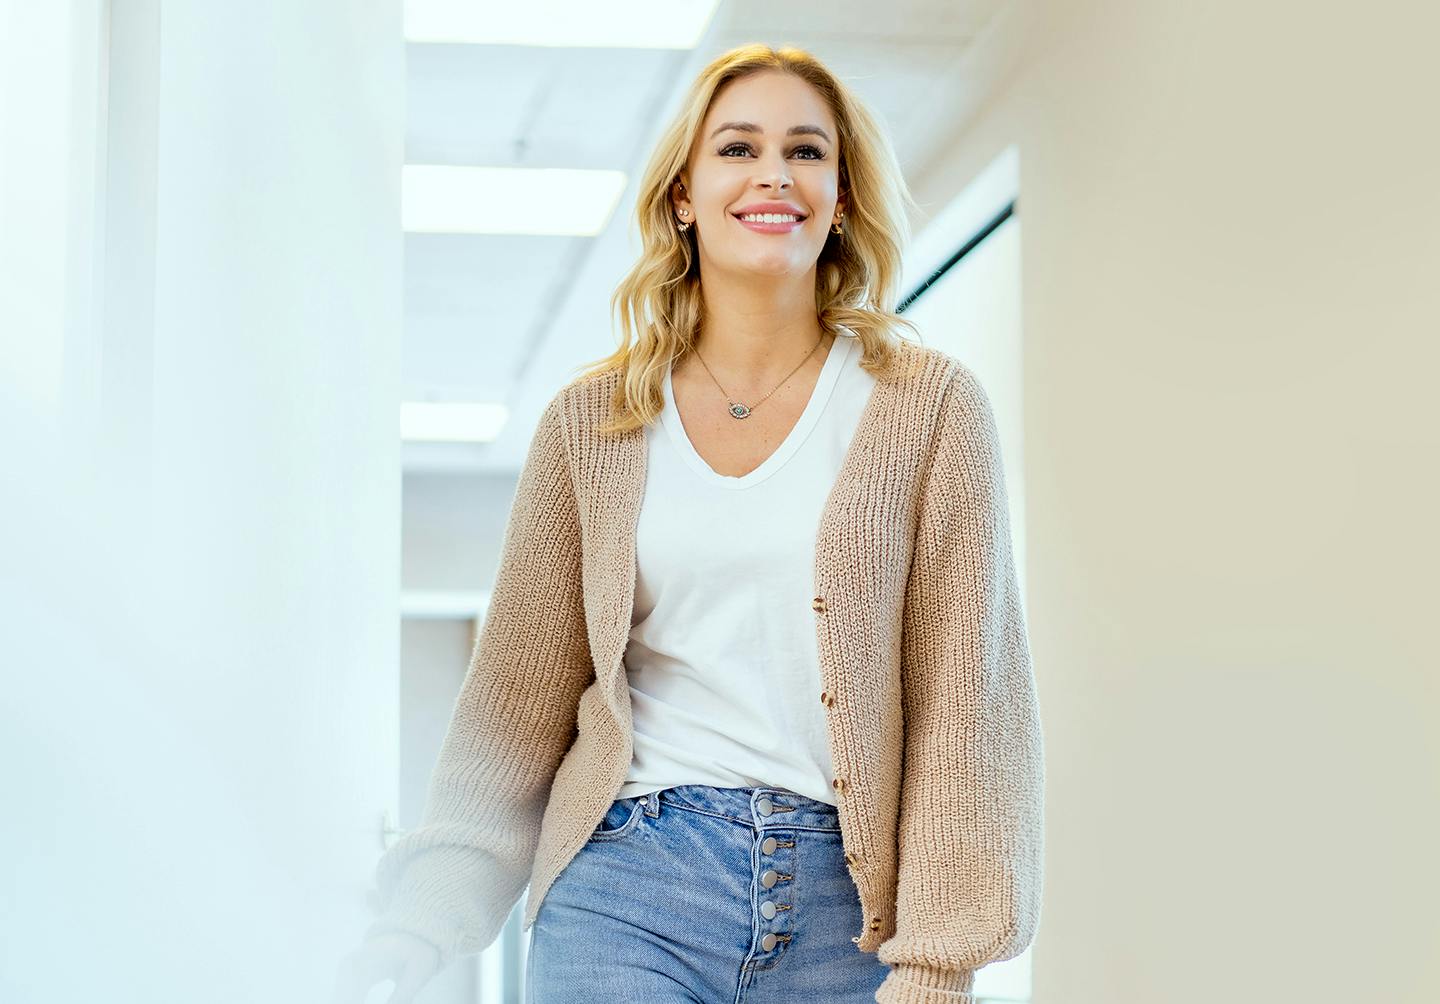 woman walking down a hallway in a white shirt, tan cardigan, and blue jeans